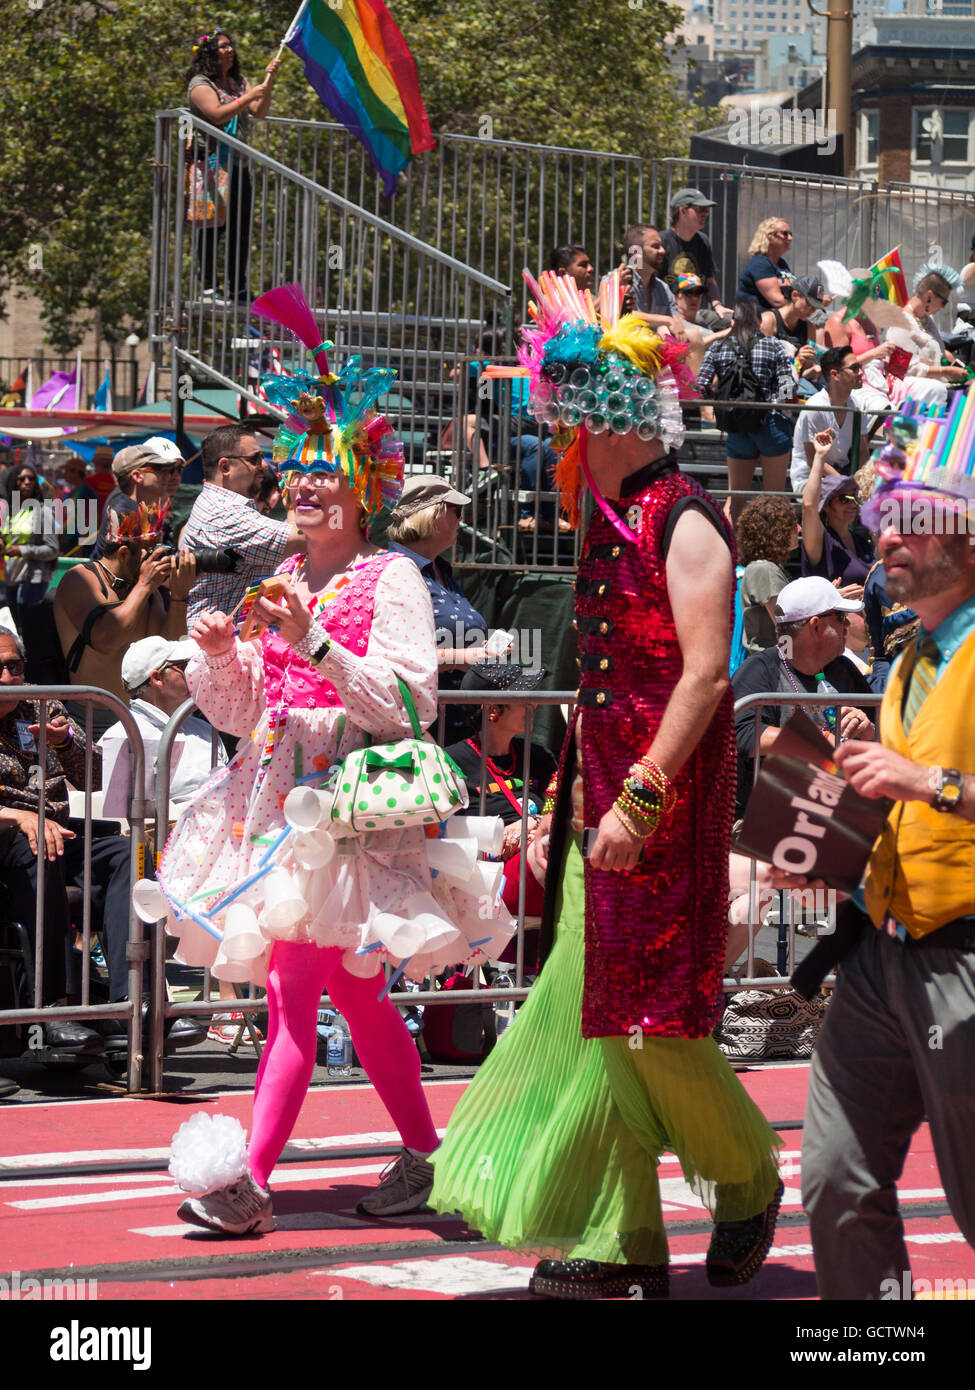 A group of people in colorful costumes parade at San Francisco Pride Parade 2016 Stock Photo